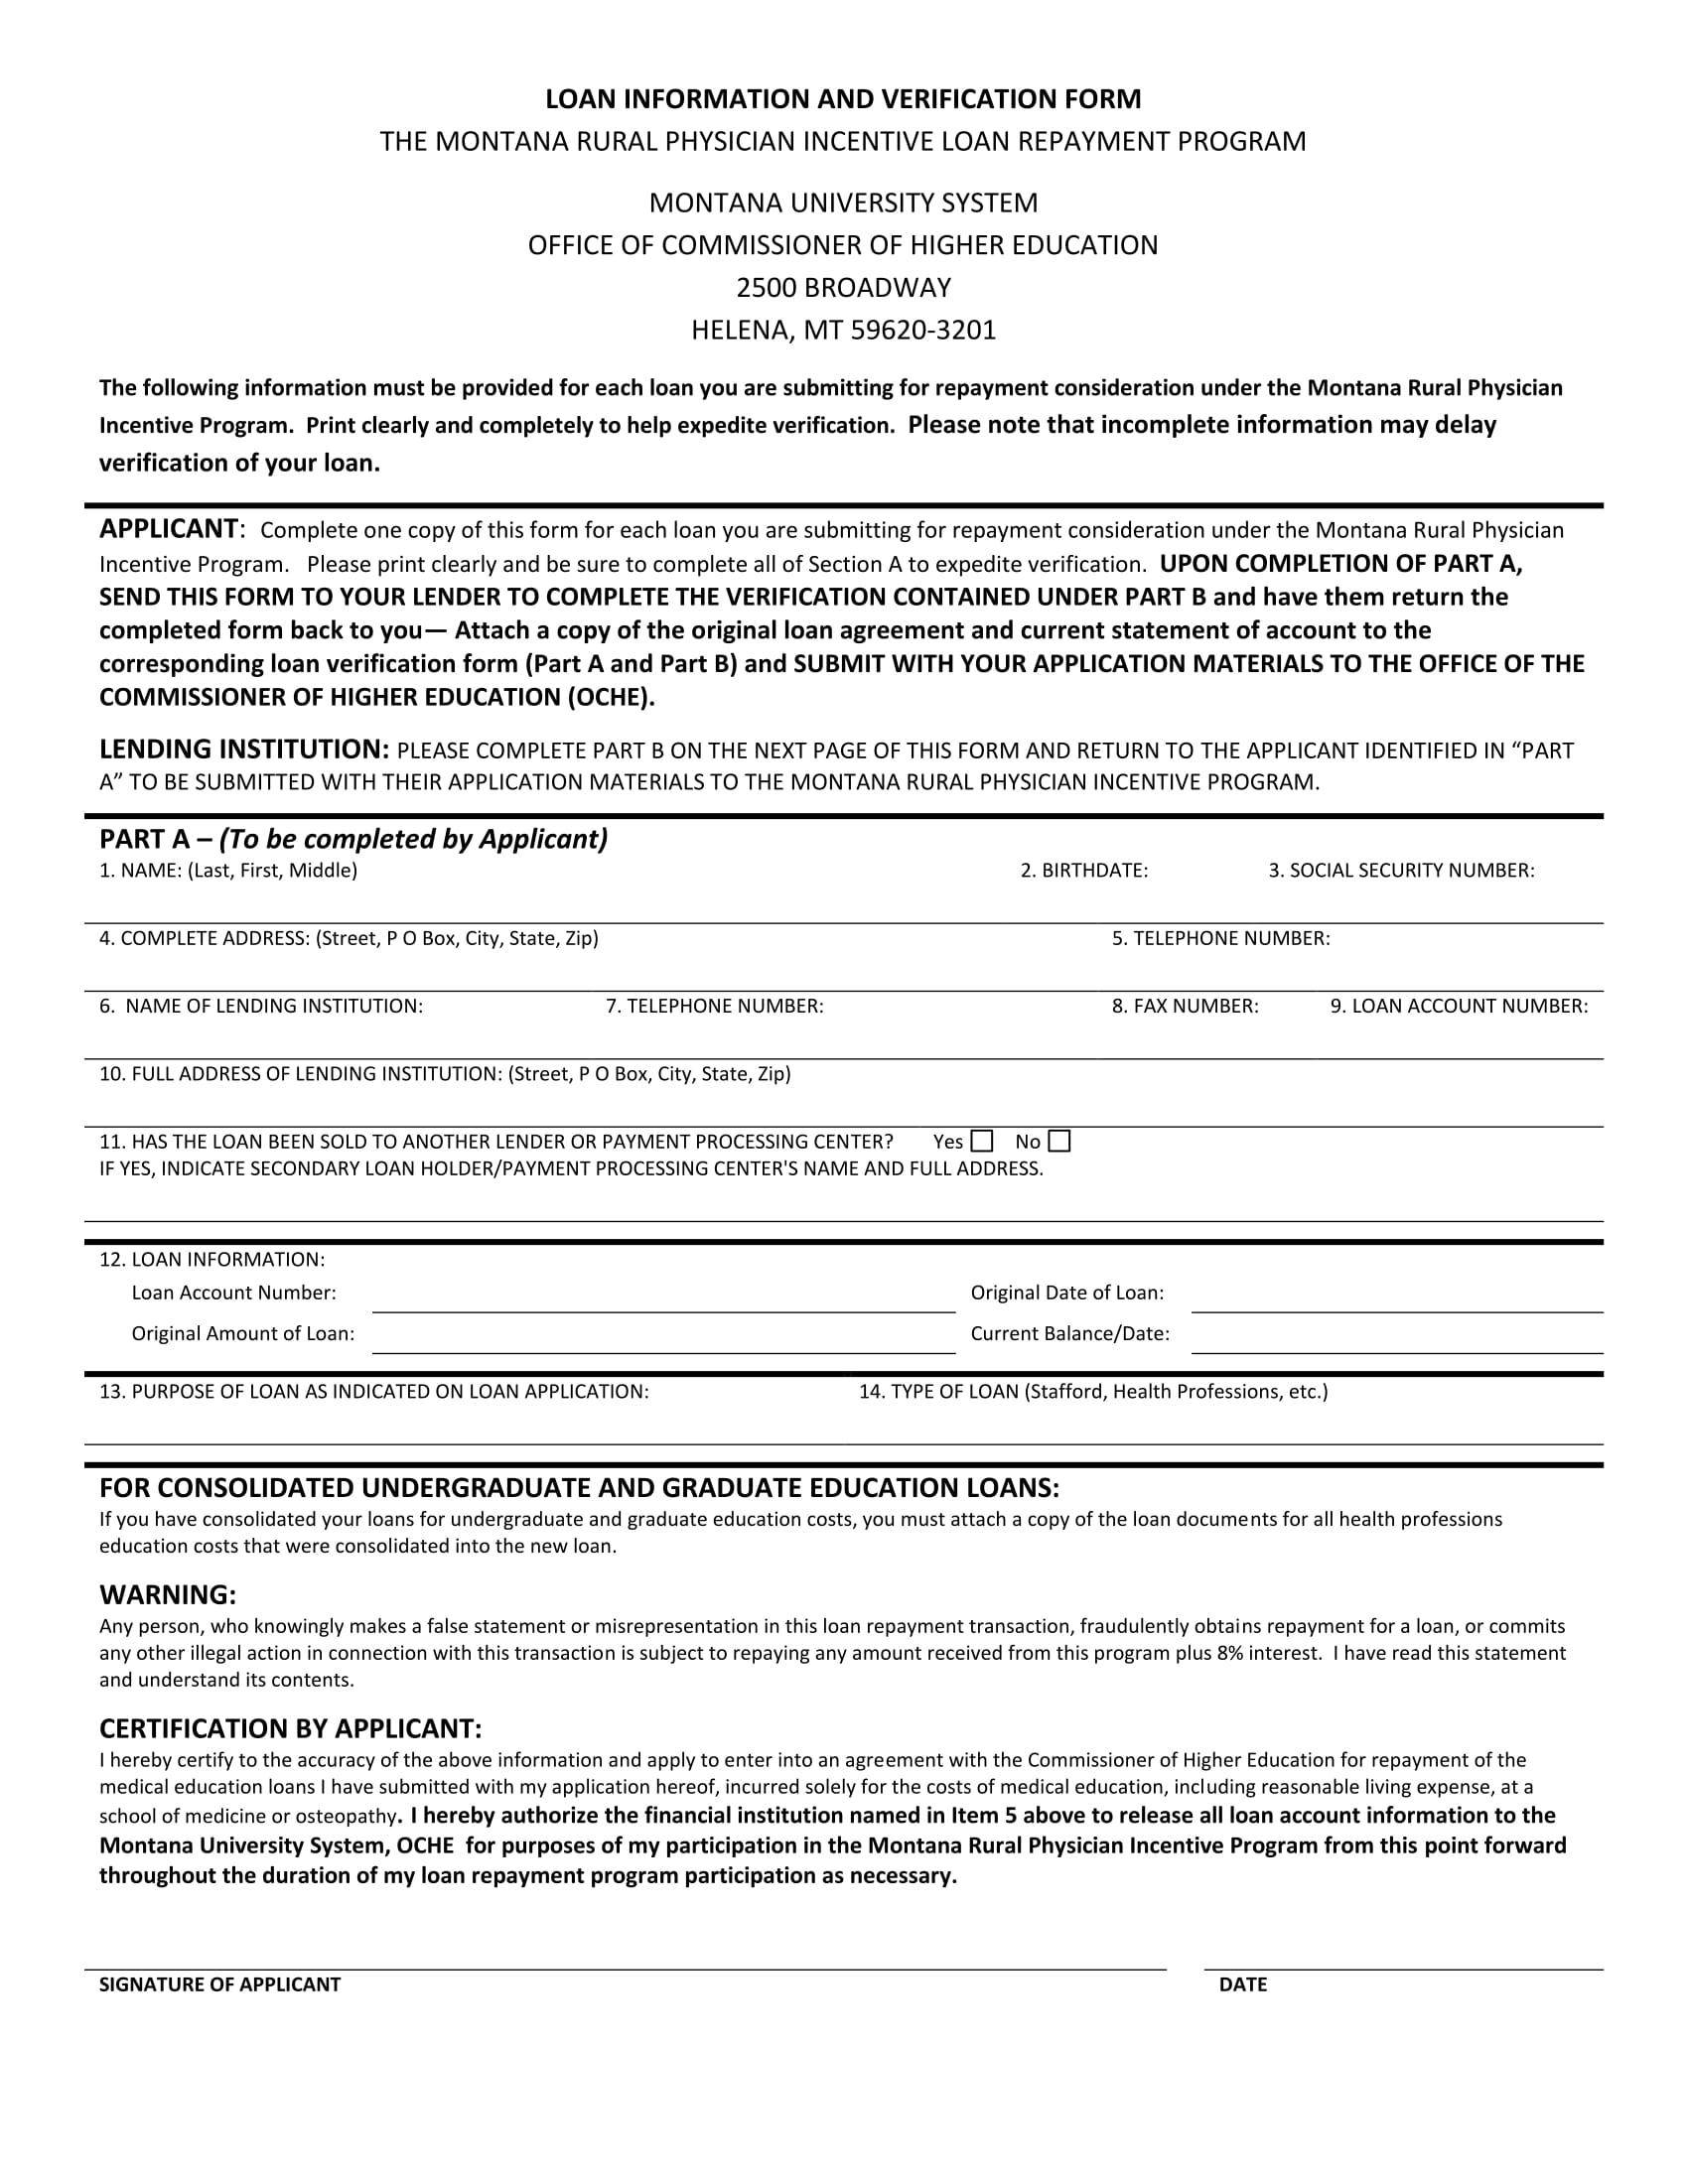 loan information and verification form 1